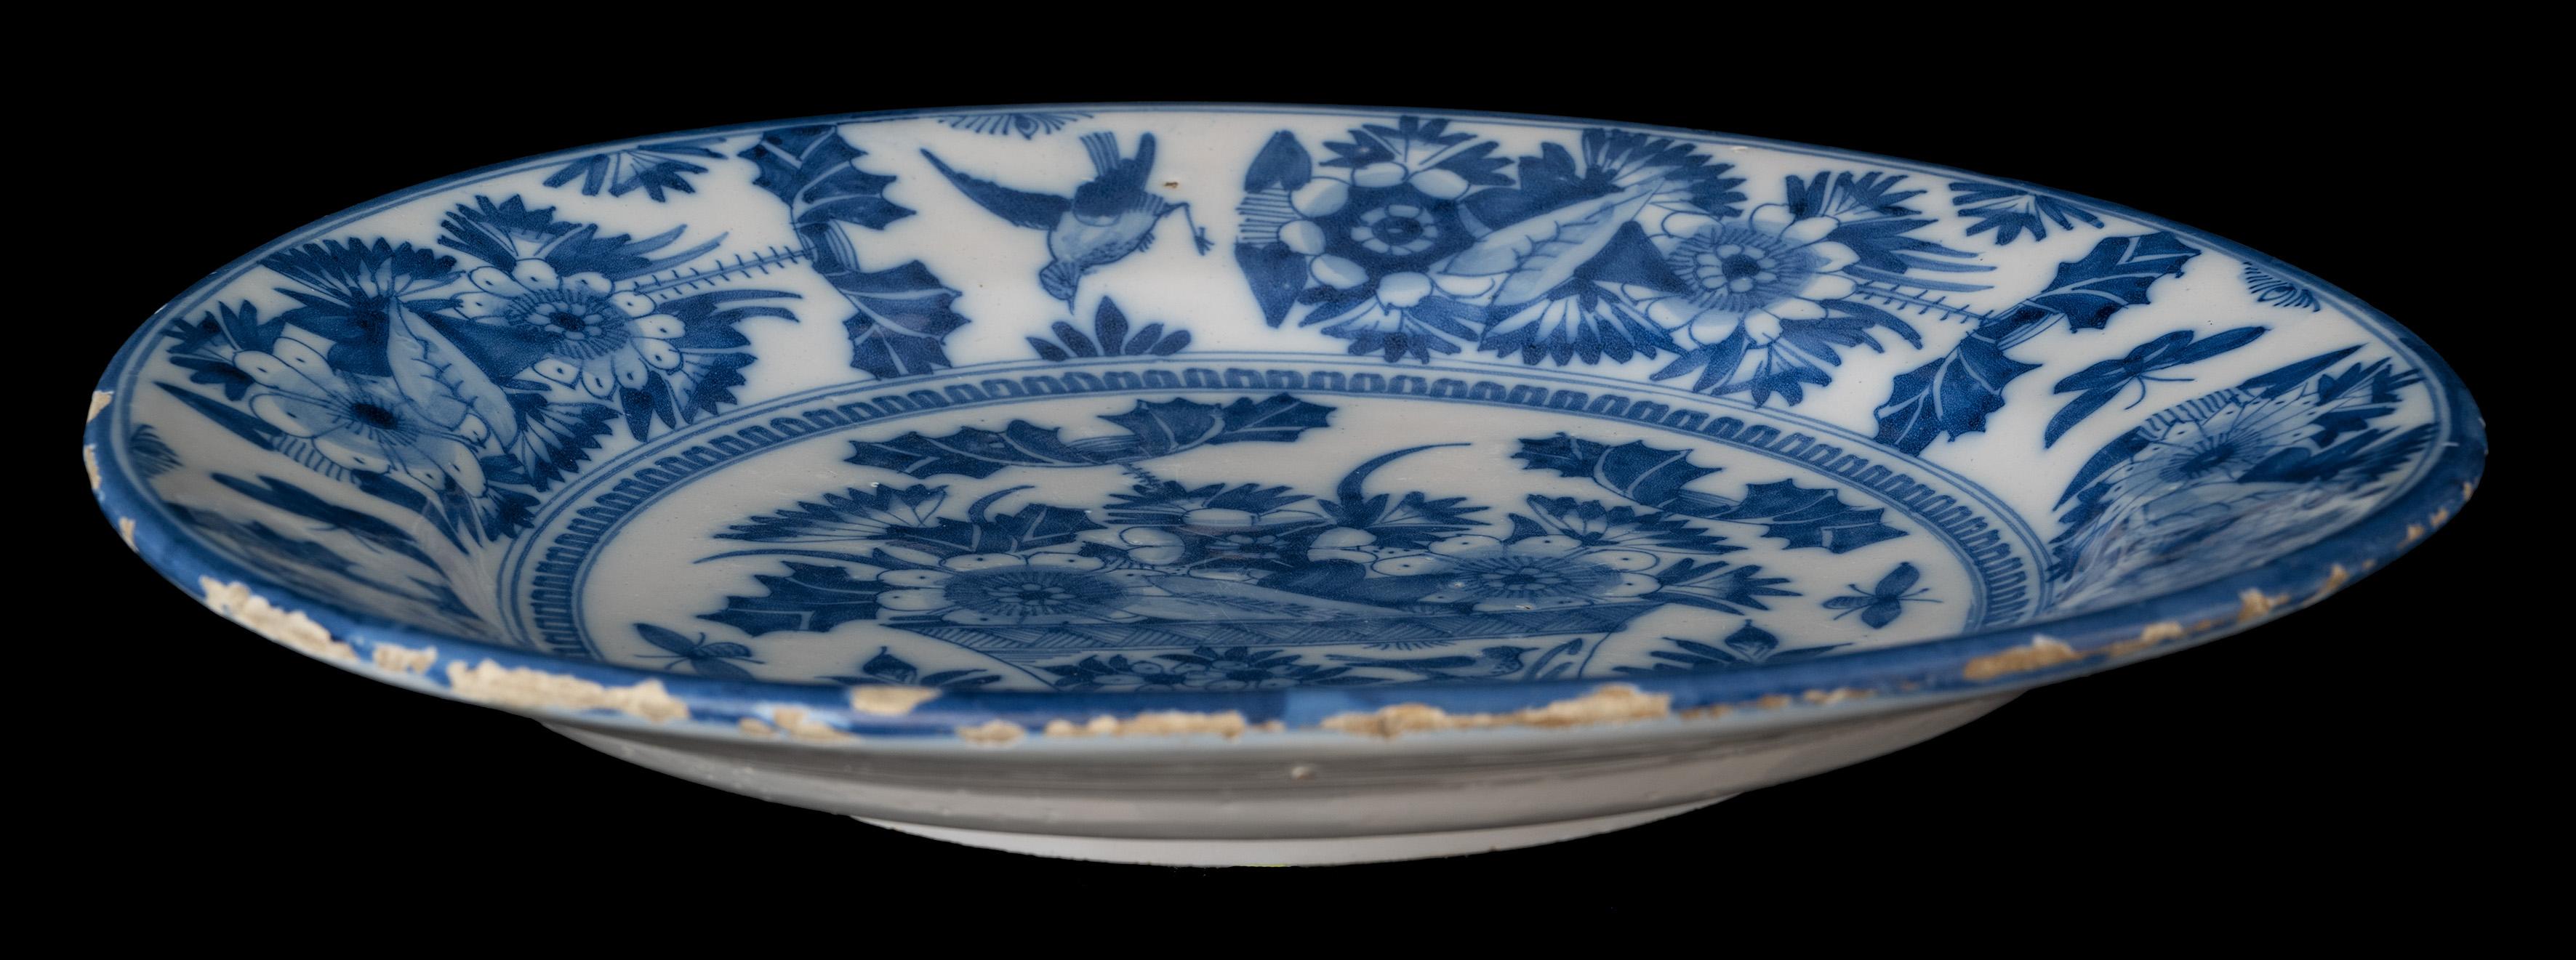 Large Blue and White Dish with Flower Vase, Delft, 1665-1675 In Good Condition For Sale In Verviers, BE